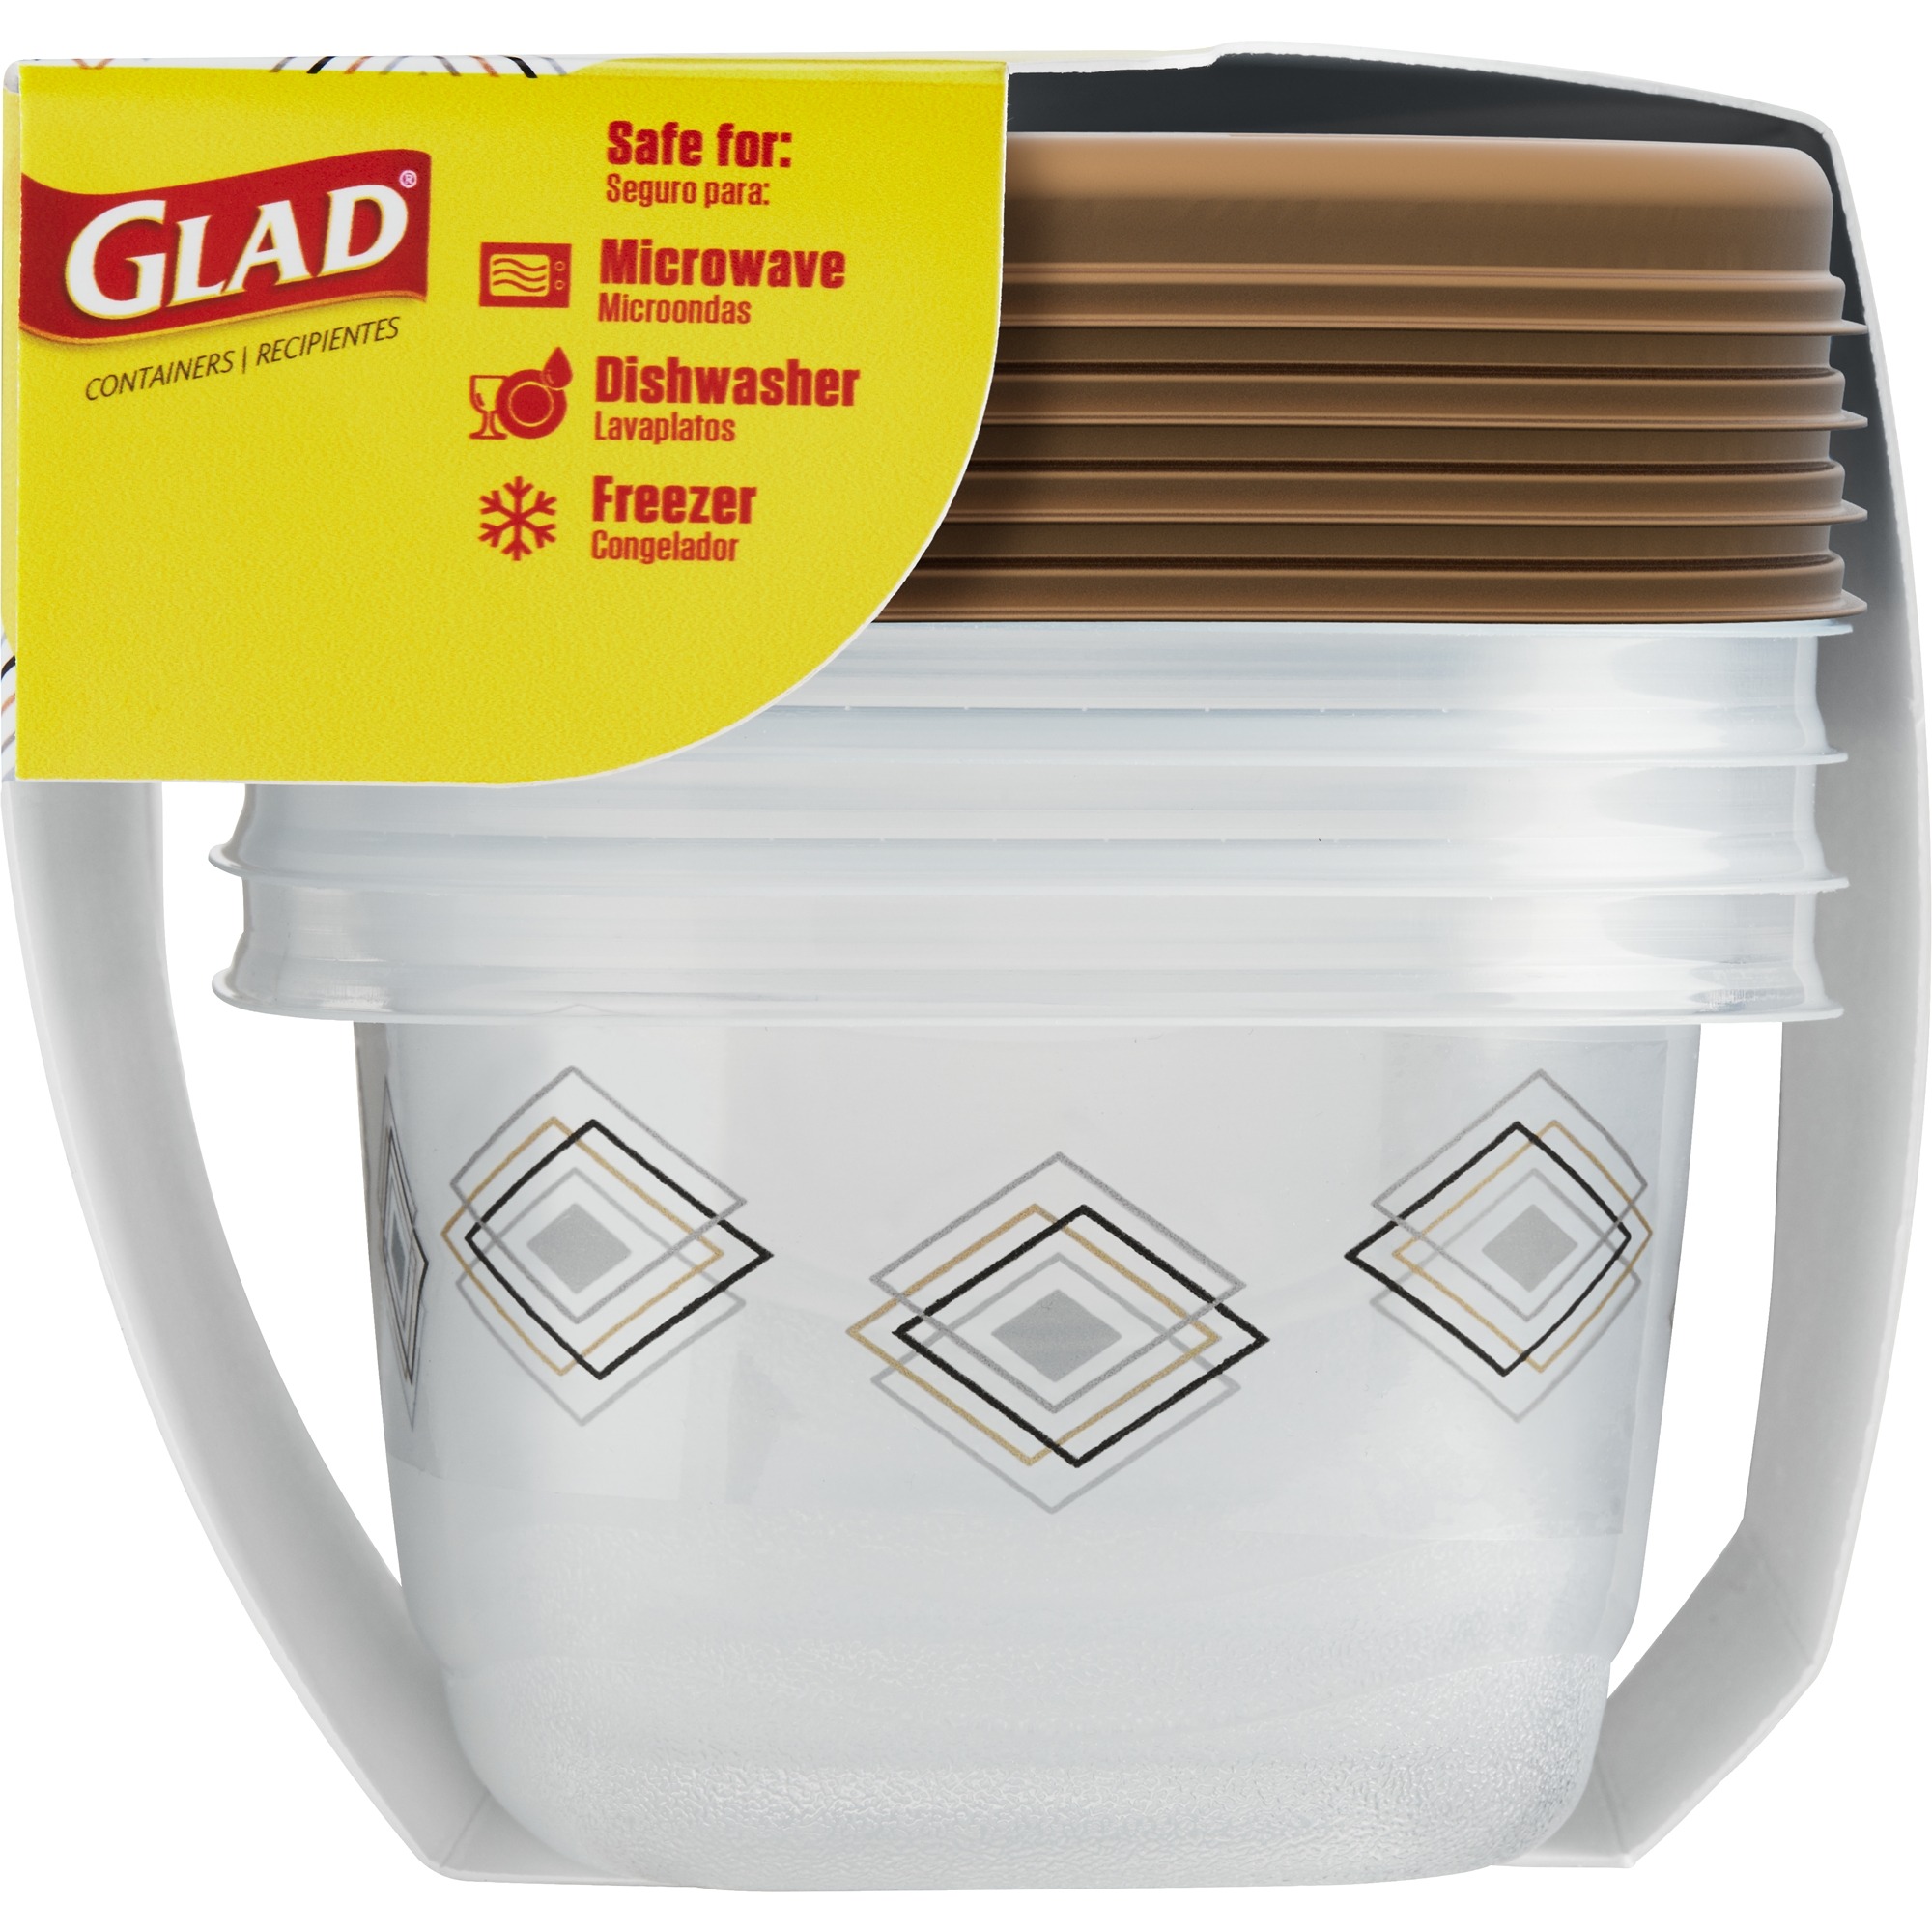 Glad Food Storage Containers - Designer Series Medium Rectangle Container - 24 oz - 4 Containers - image 5 of 5